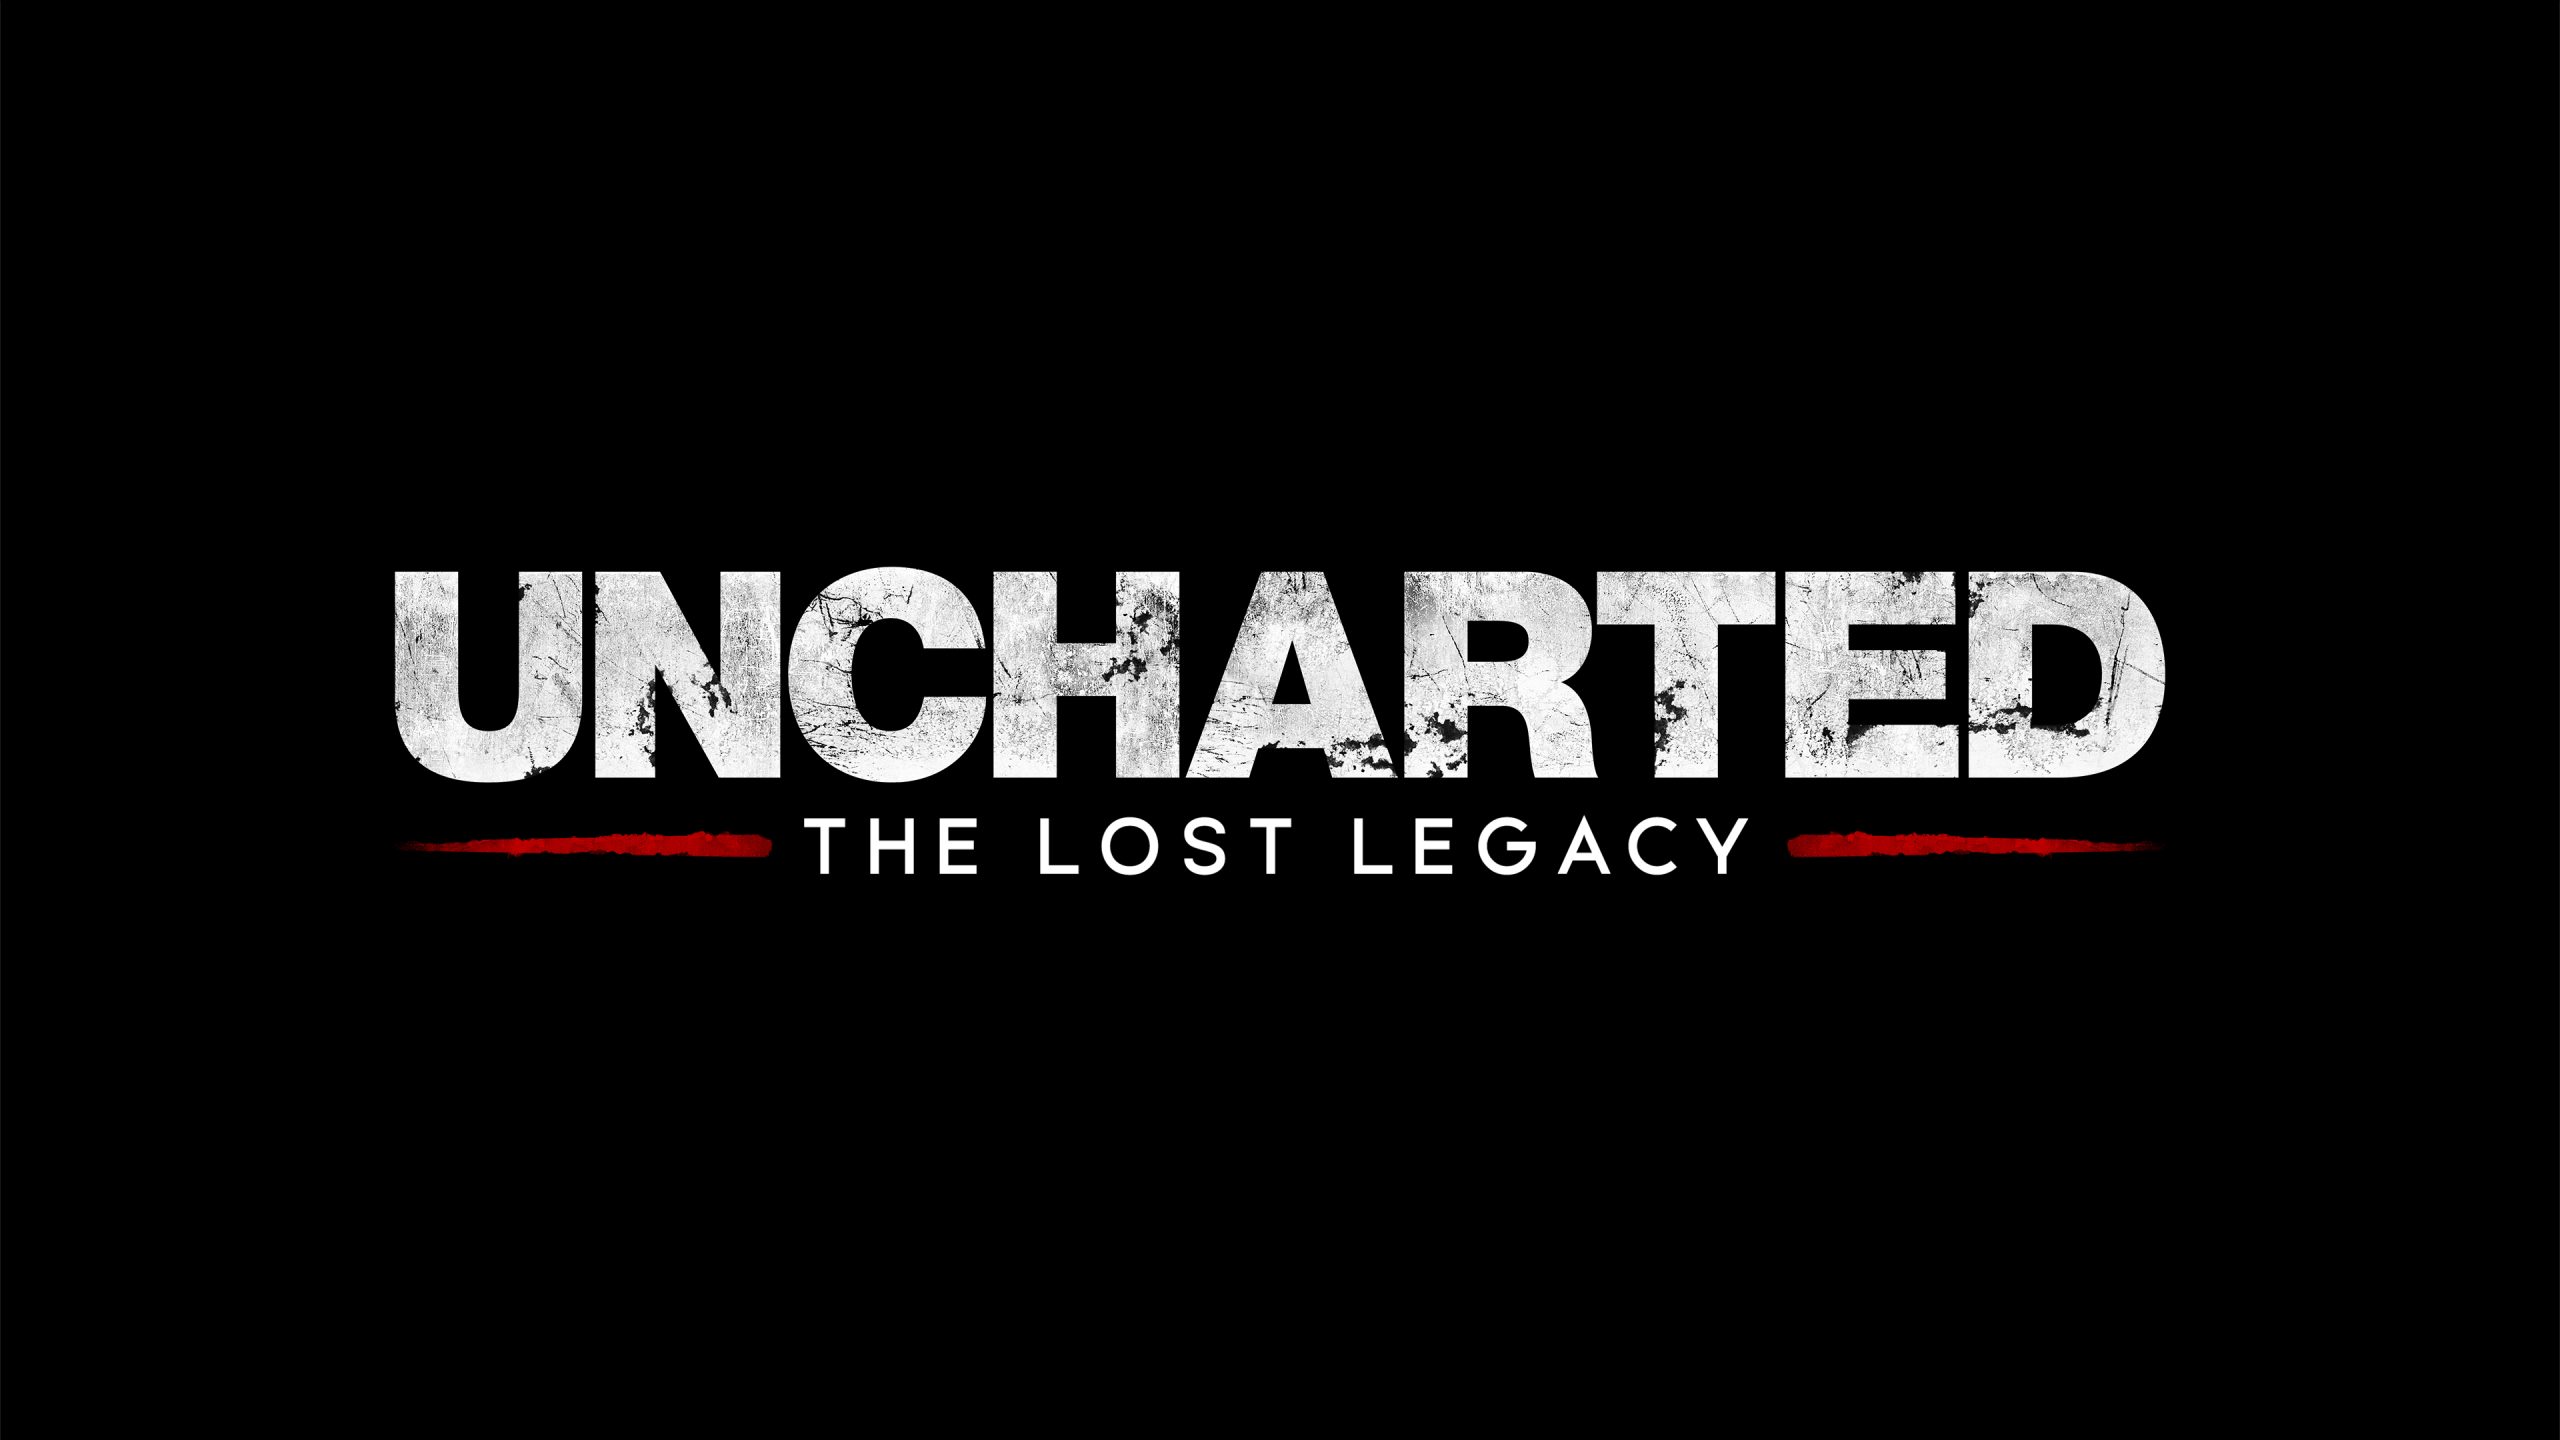 Uncharted: The Lost Legacy drops August 22nd at Php 1,799